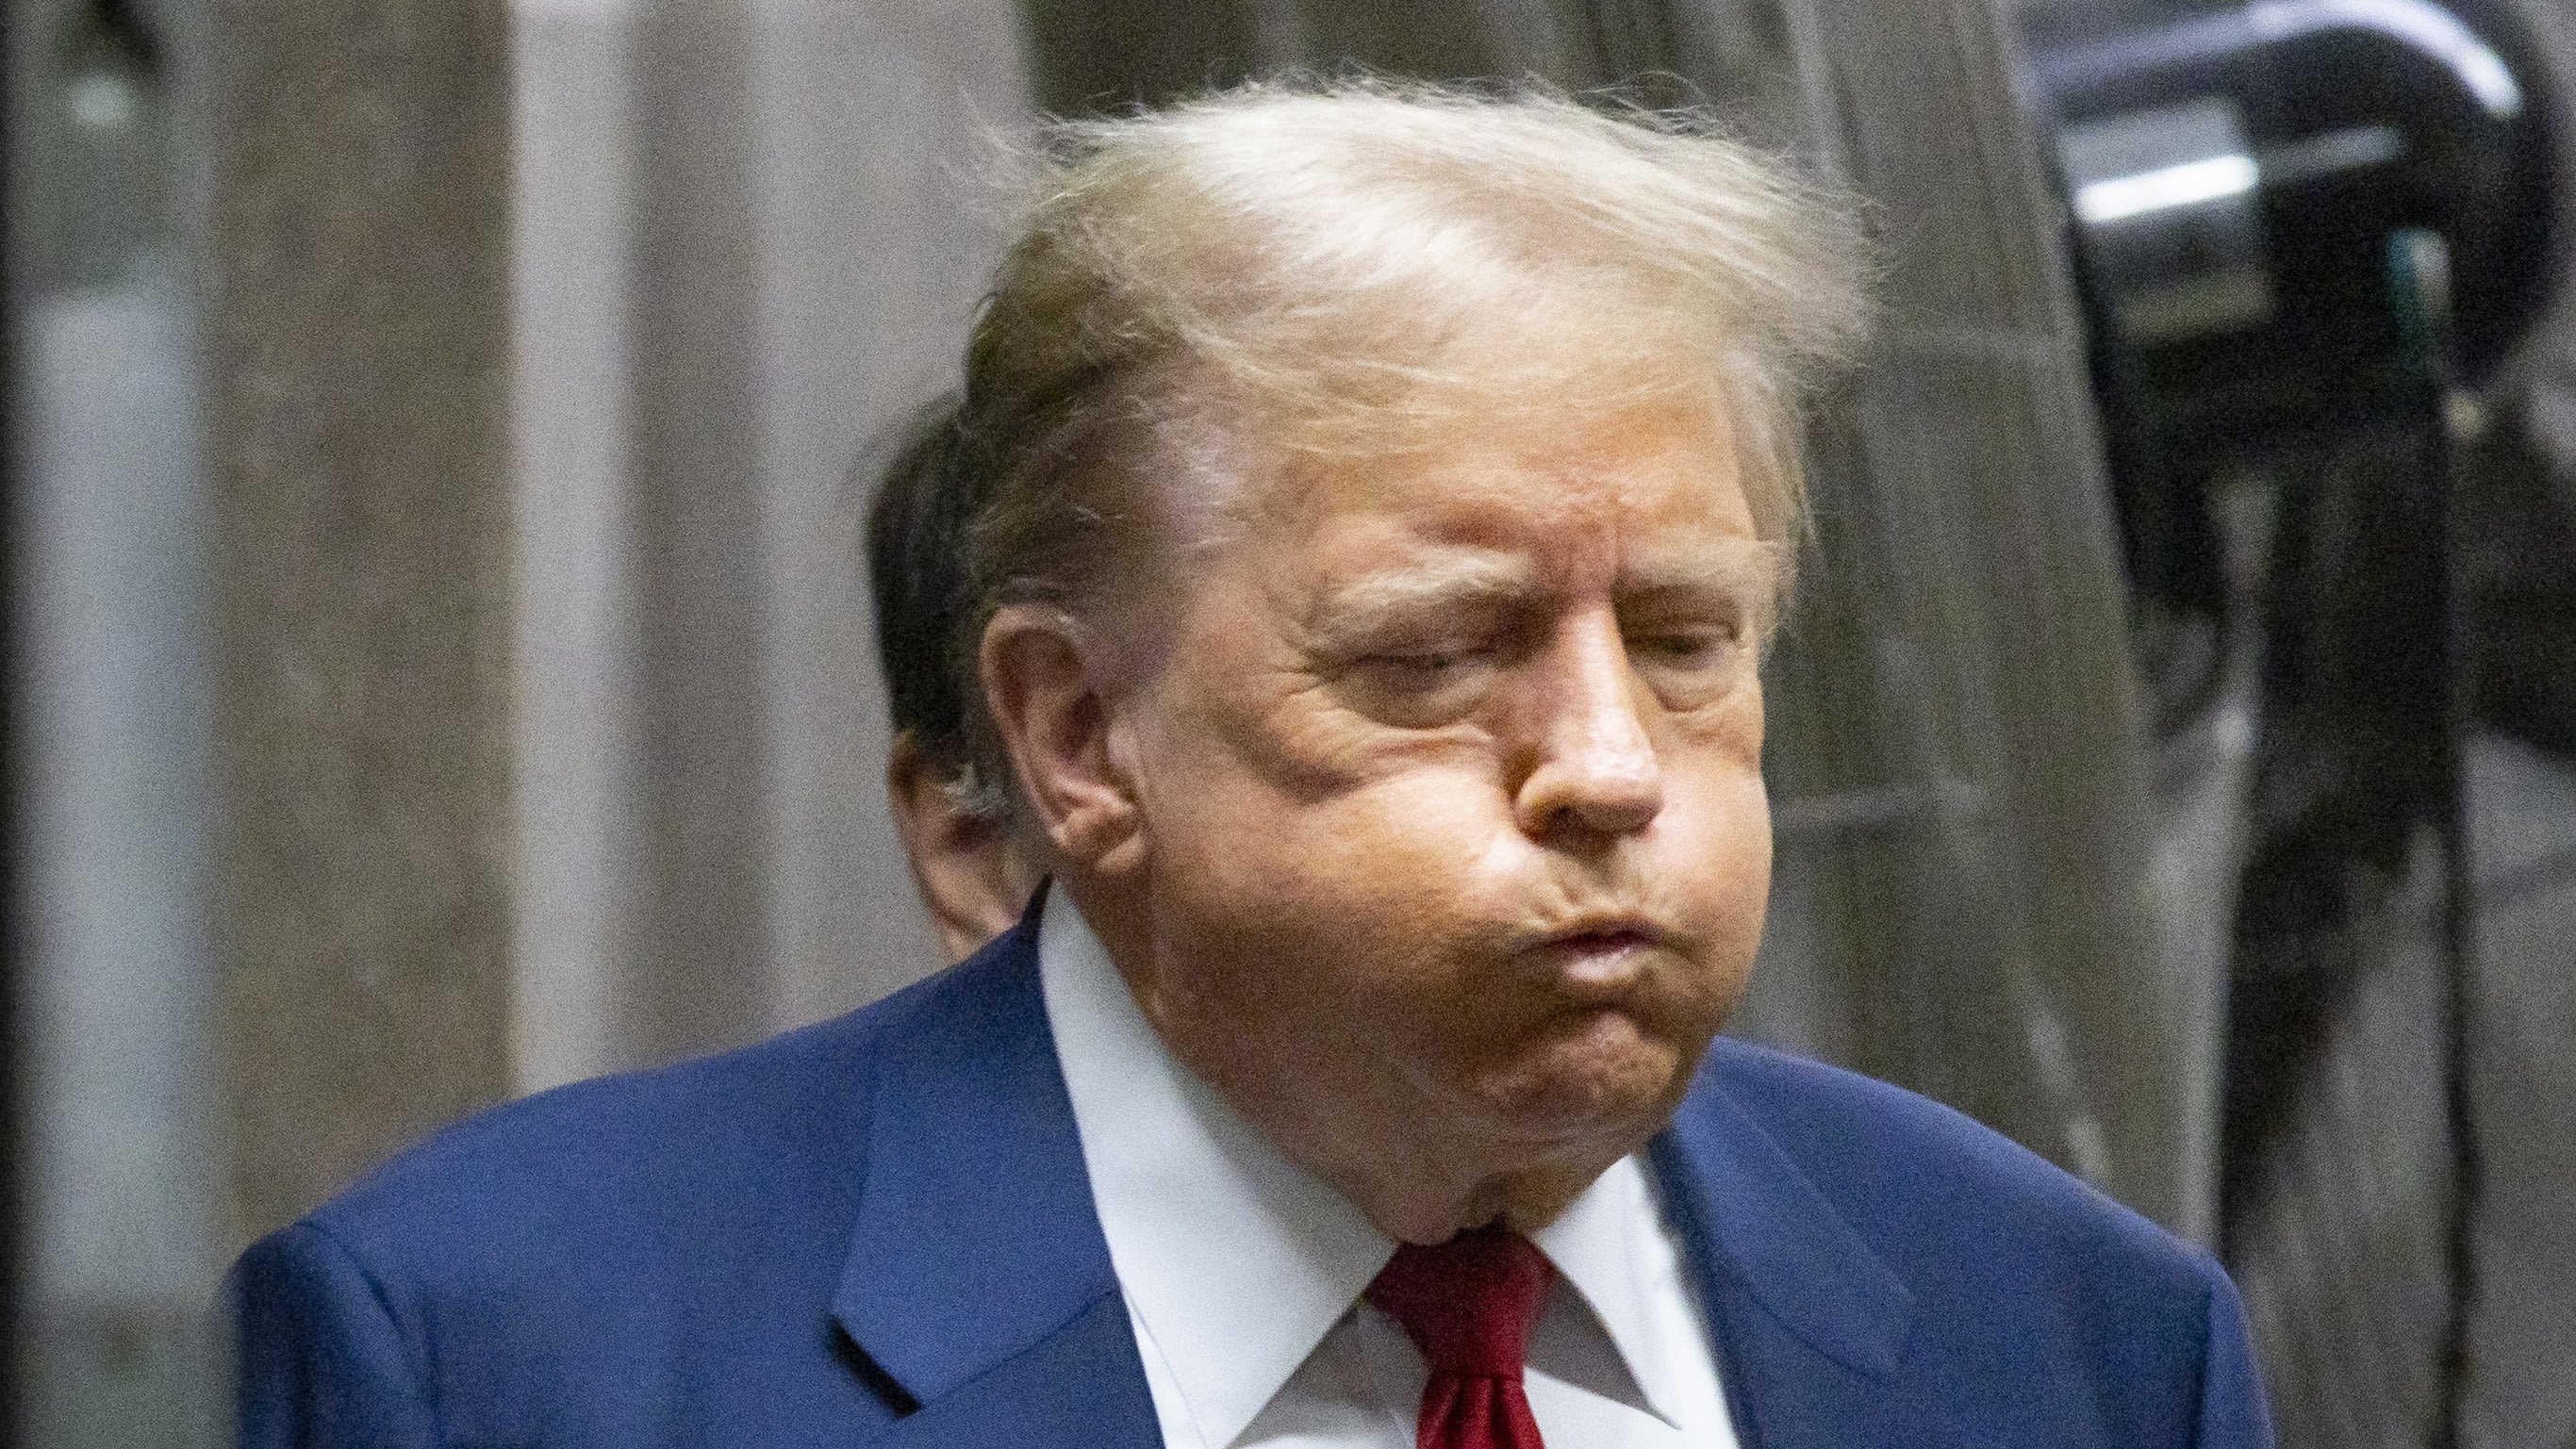 30 HILARIOUS responses to Trump making a dumb face outside the courthouse